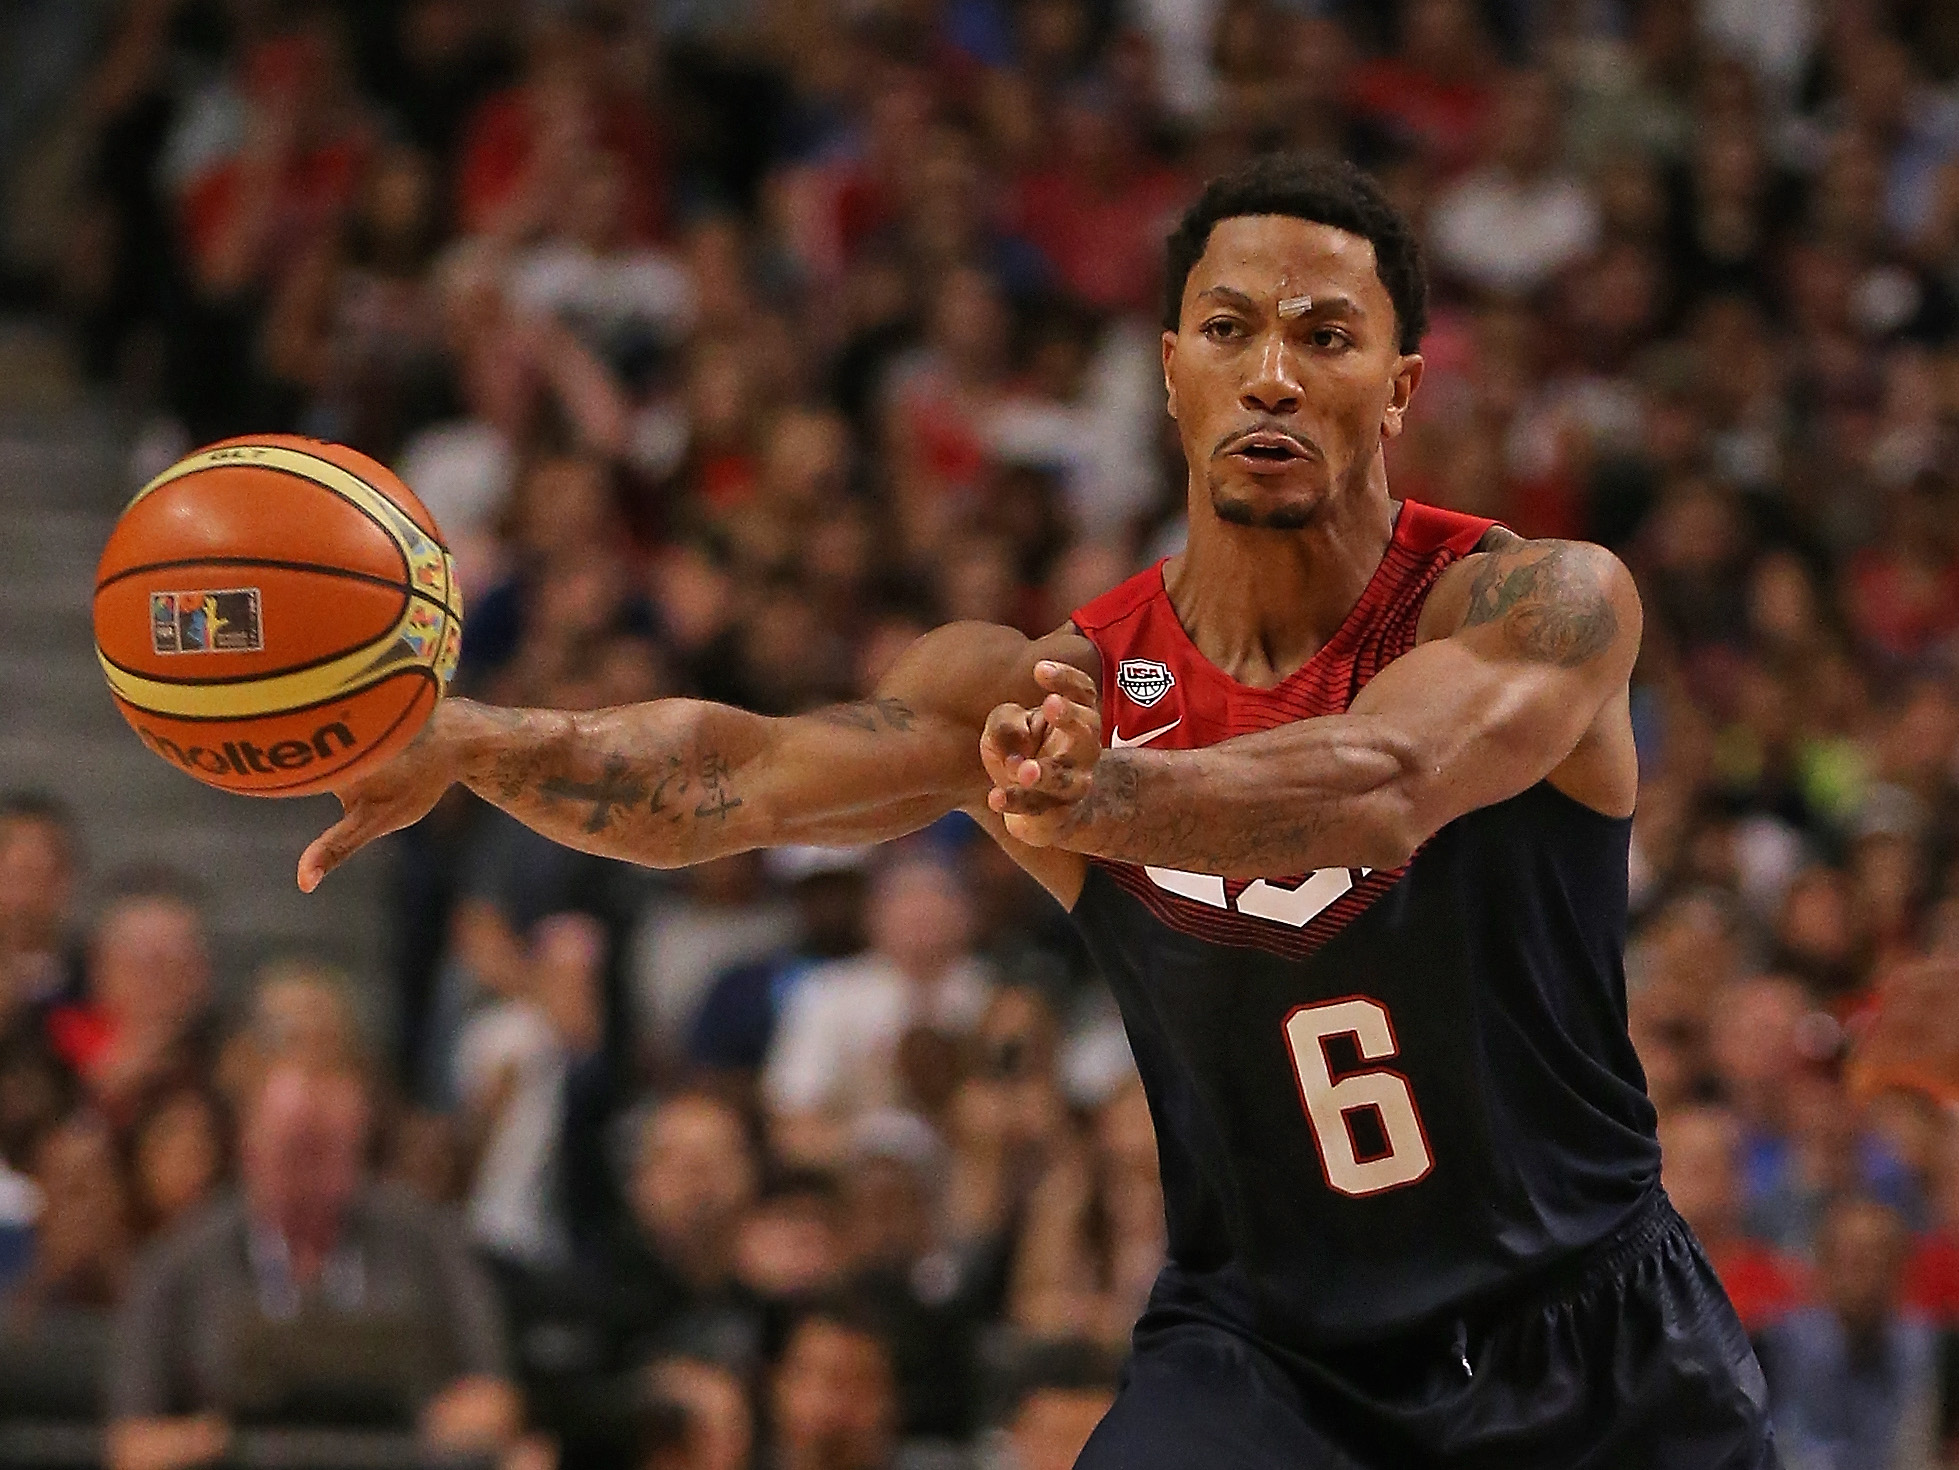 Derrick Rose Injury and Return Update Chicago Bulls Star Takes Another Step in Comeback, Shines